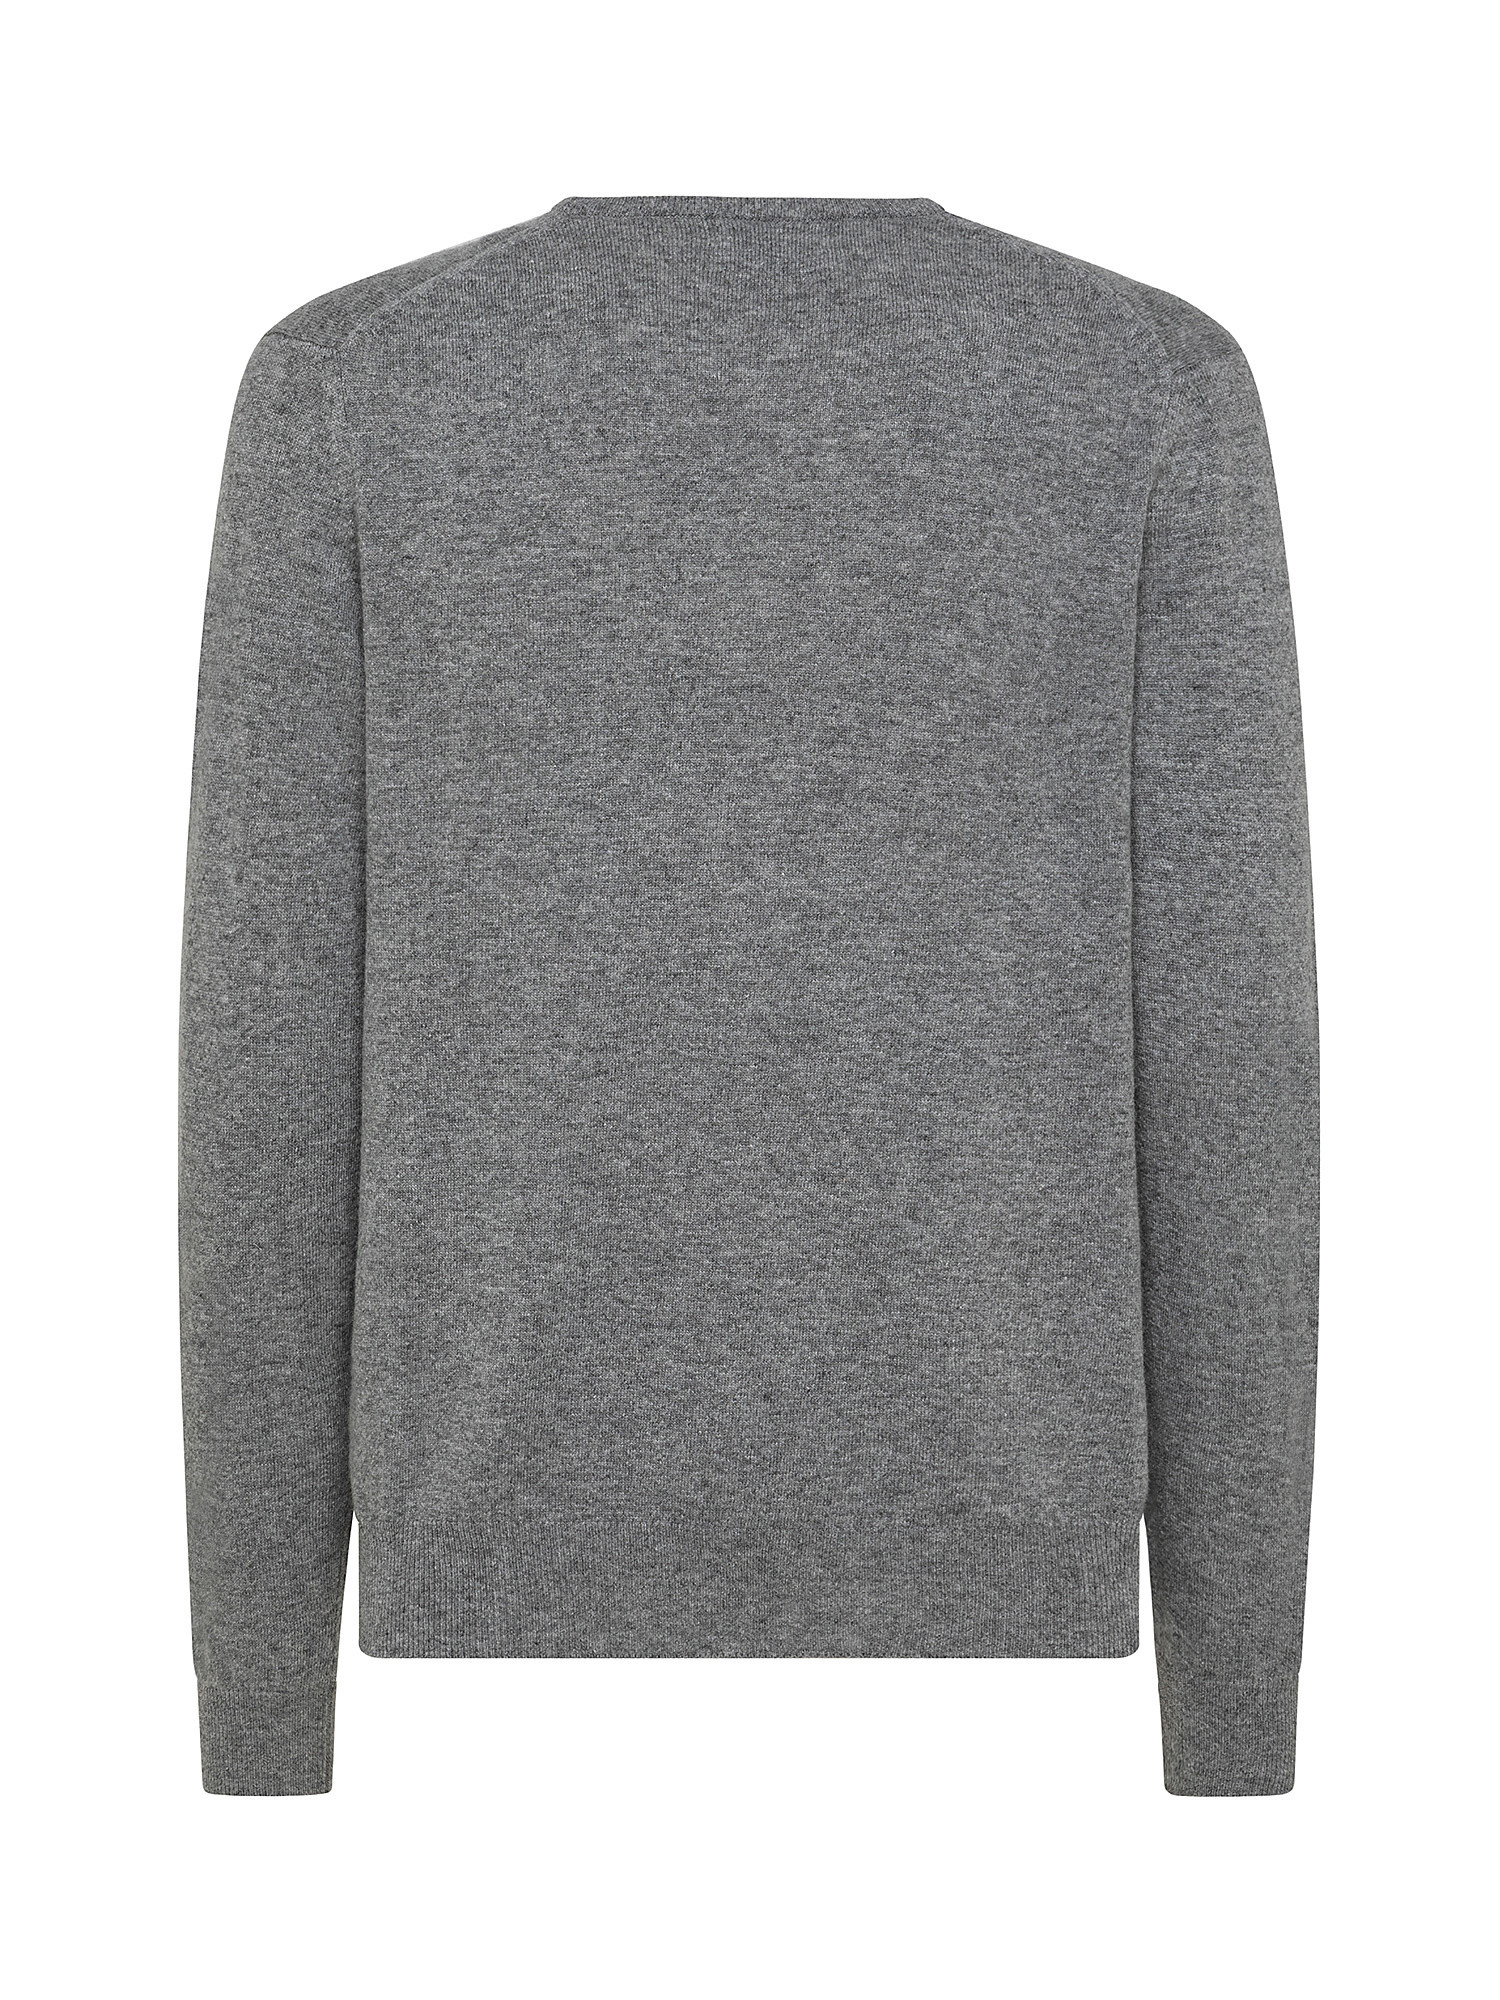 Cashmere Blend crewneck sweater with noble fibers, Grey, large image number 1